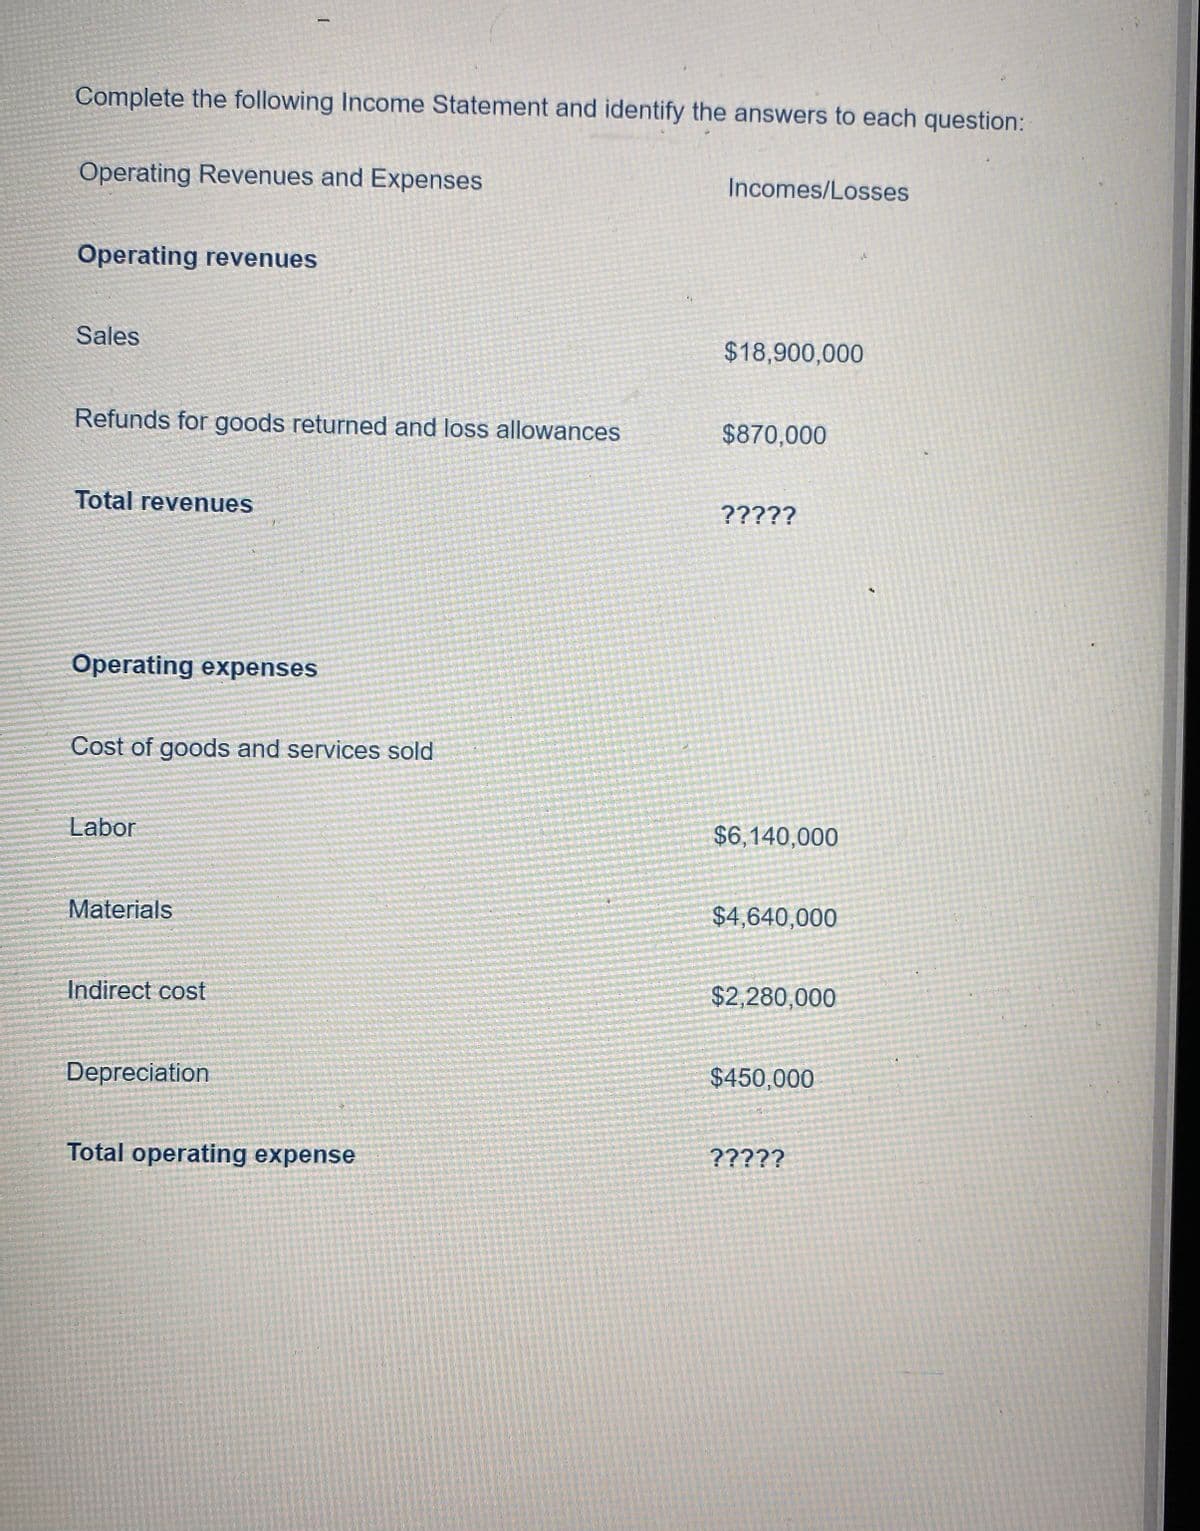 Complete the following Income Statement and identify the answers to each question:
Operating Revenues and Expenses
Incomes/Losses
Operating revenues
Sales
$18,900,000
Refunds for goods returned and loss allowances
$870,000
Total revenues
?????
Operating expenses
Cost of goods and services sold
Labor
$6,140,000
Materials
$4,640,000
Indirect cost
$2,280,000
Depreciation
$450,000
Total operating expense
?????
